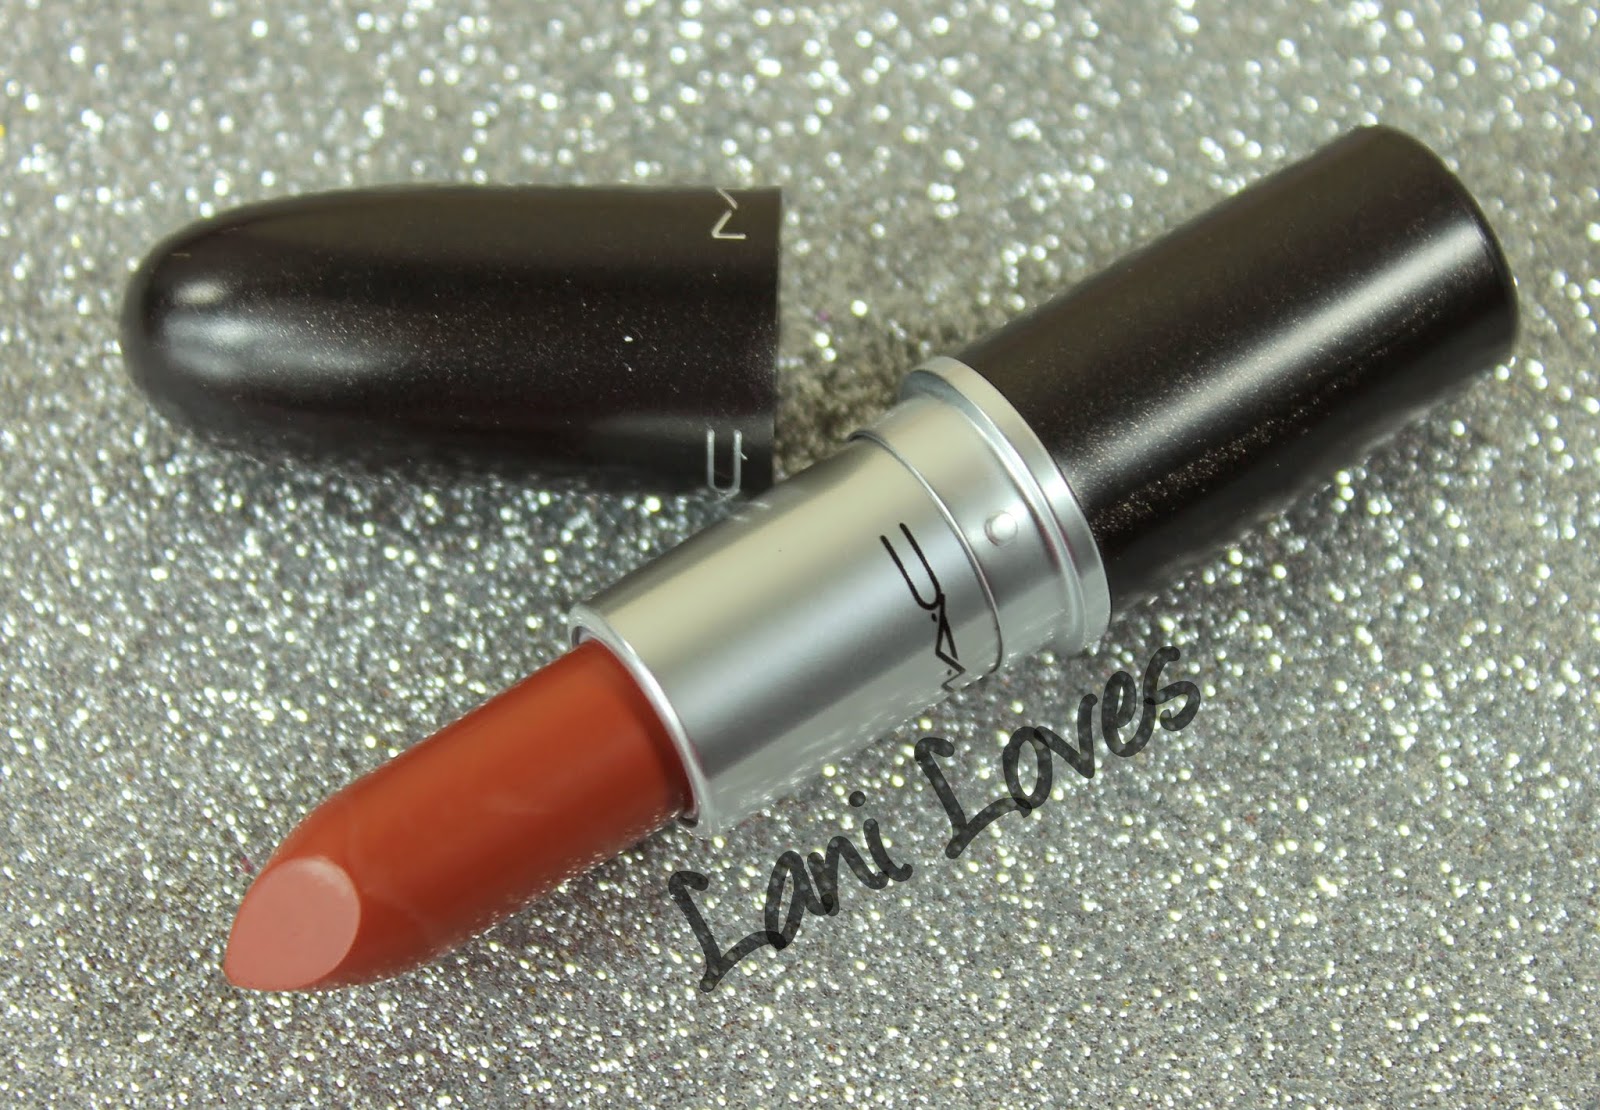 MAC Pander Me Lipstick Swatches & Review